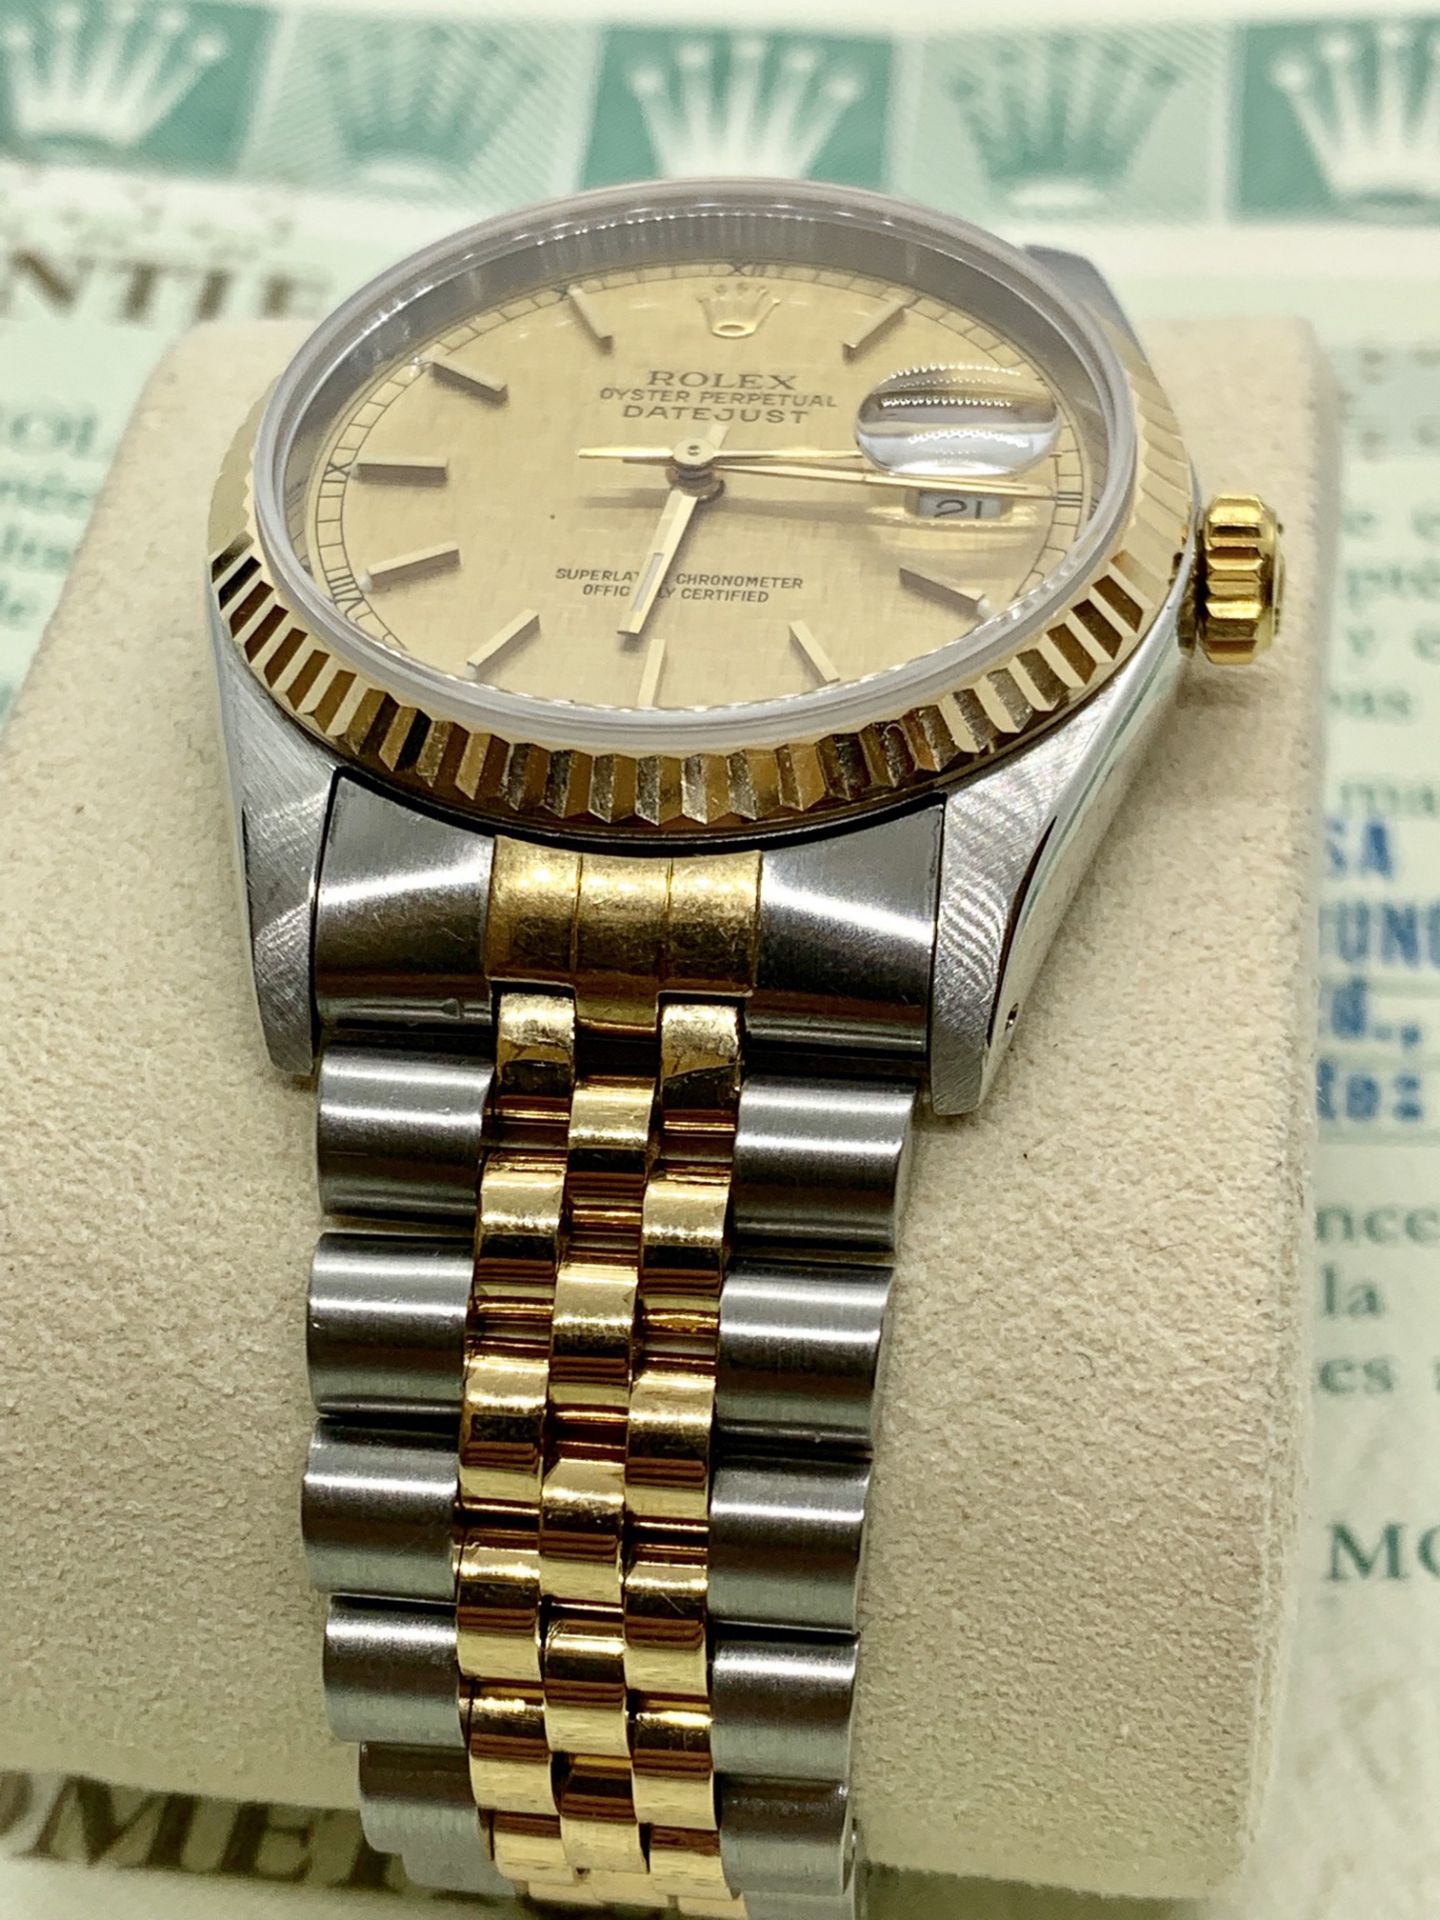 ROLEX S/S & GOLD GENTS WATCH WITH ROLEX CERTIFICATE - Image 2 of 6